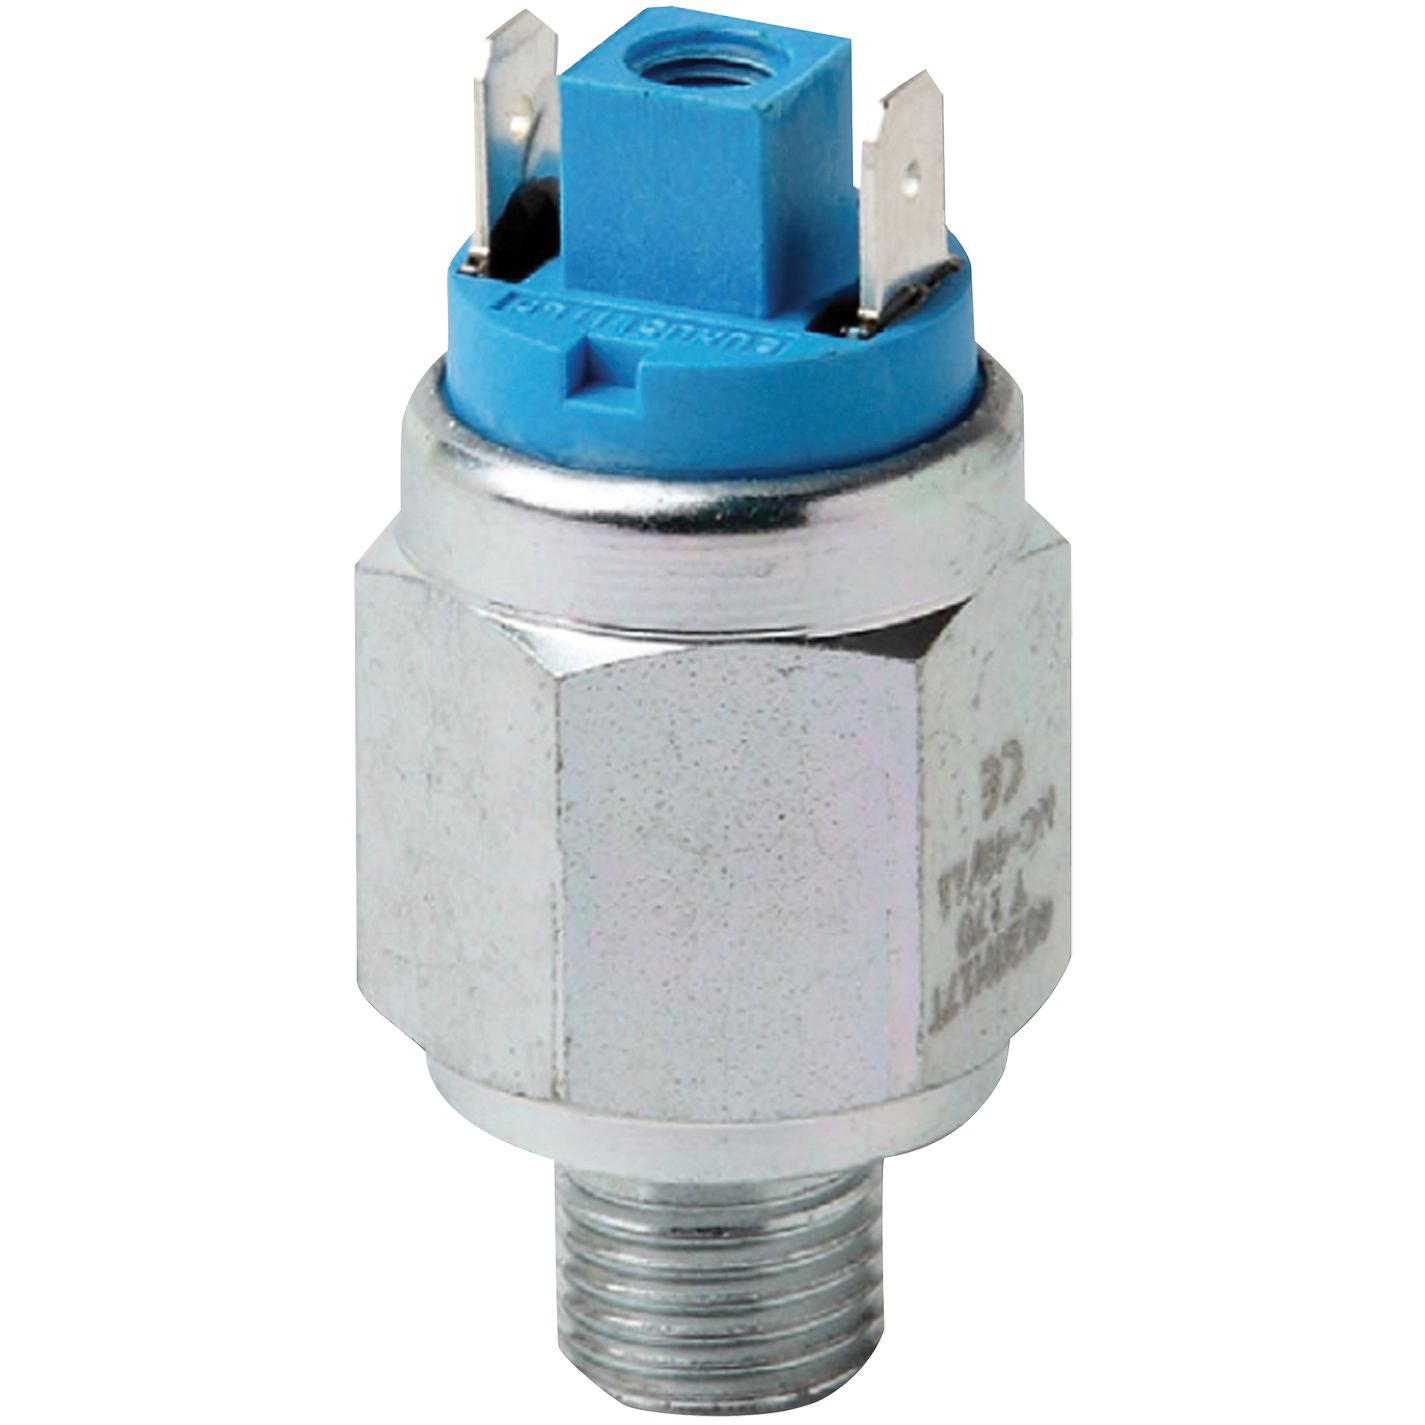 PRESSURE SWITCH SPDT CONTACT 1-12